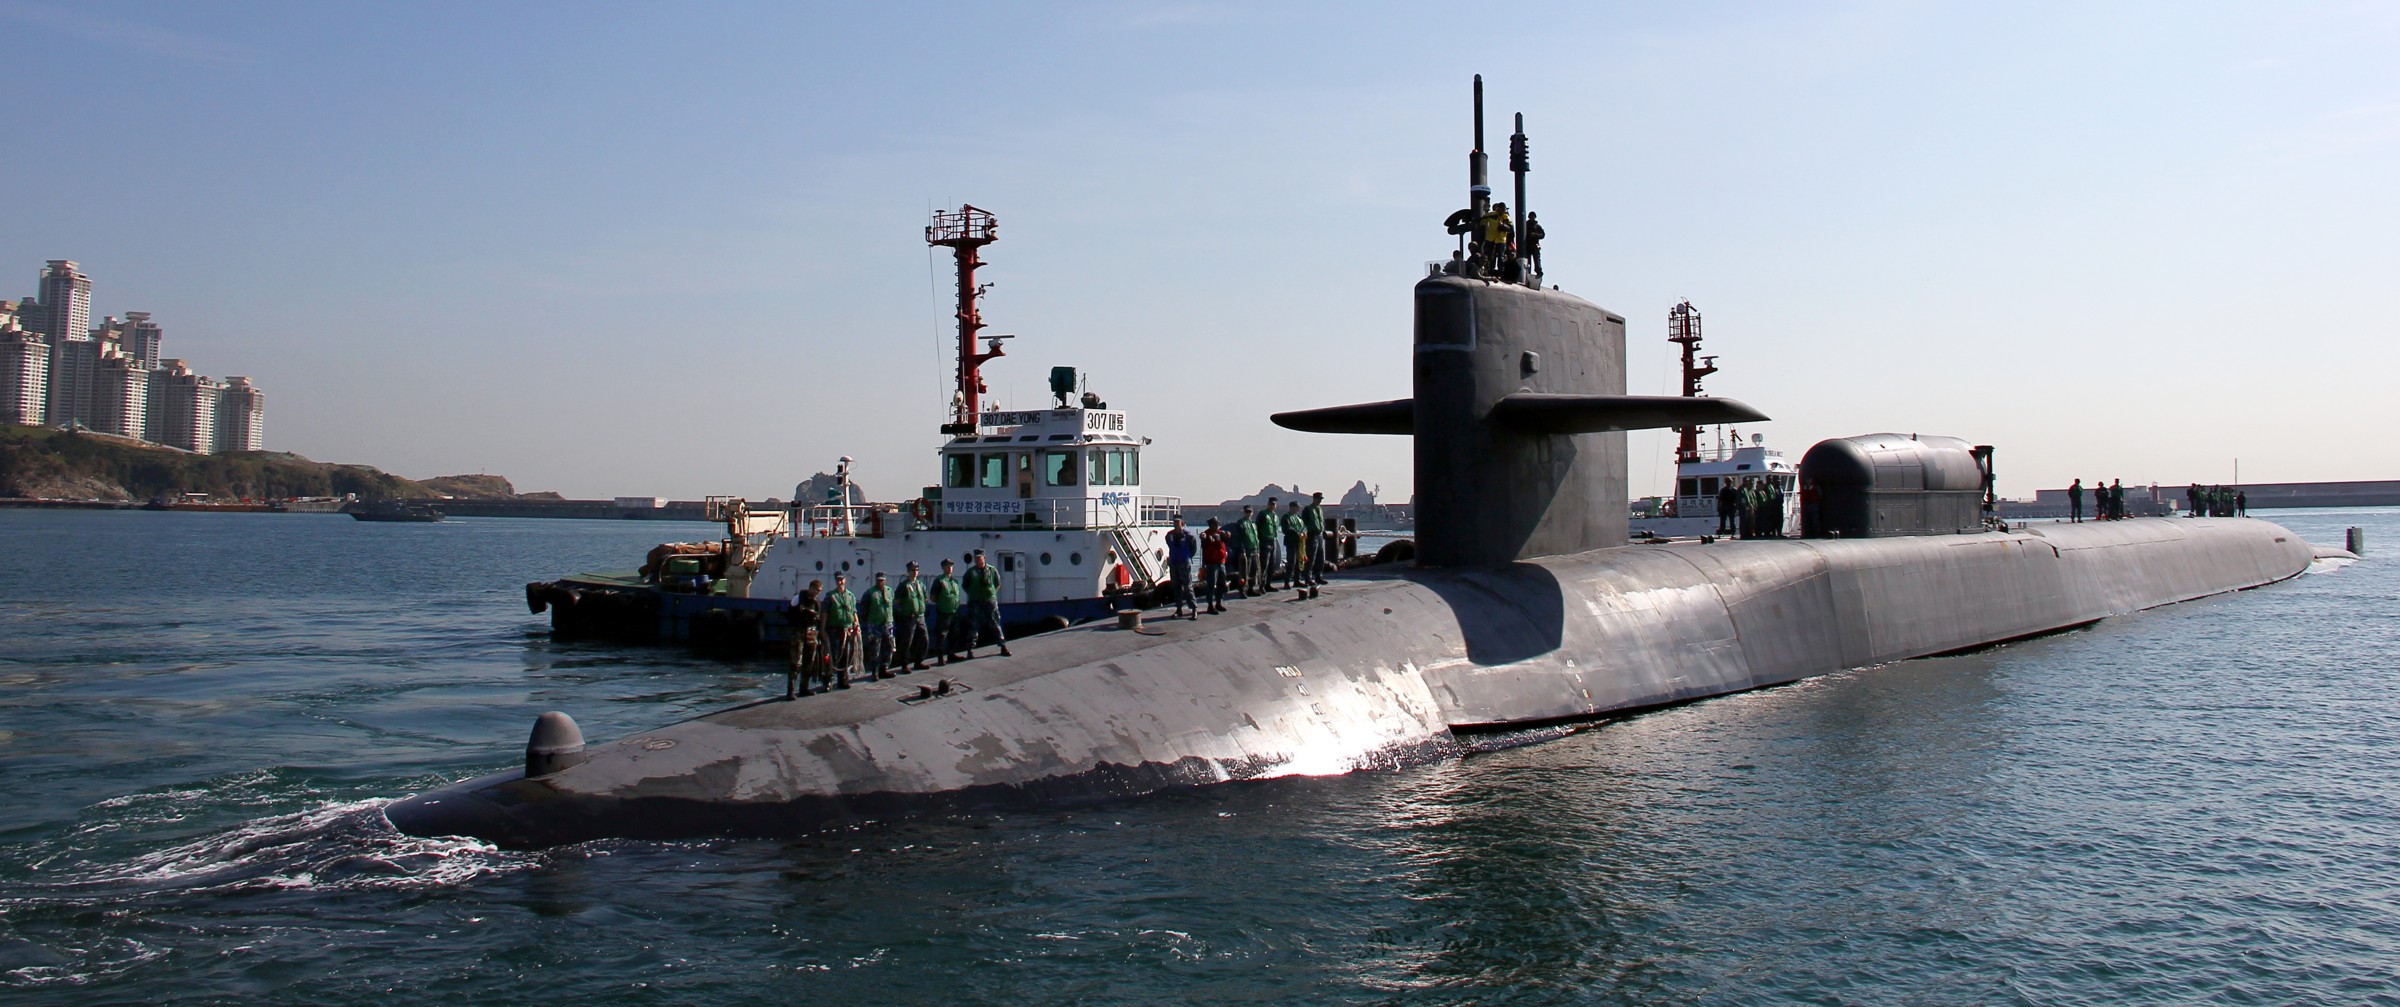 ssgn-726 uss ohio guided missile submarine us navy 2012 26 busan korea